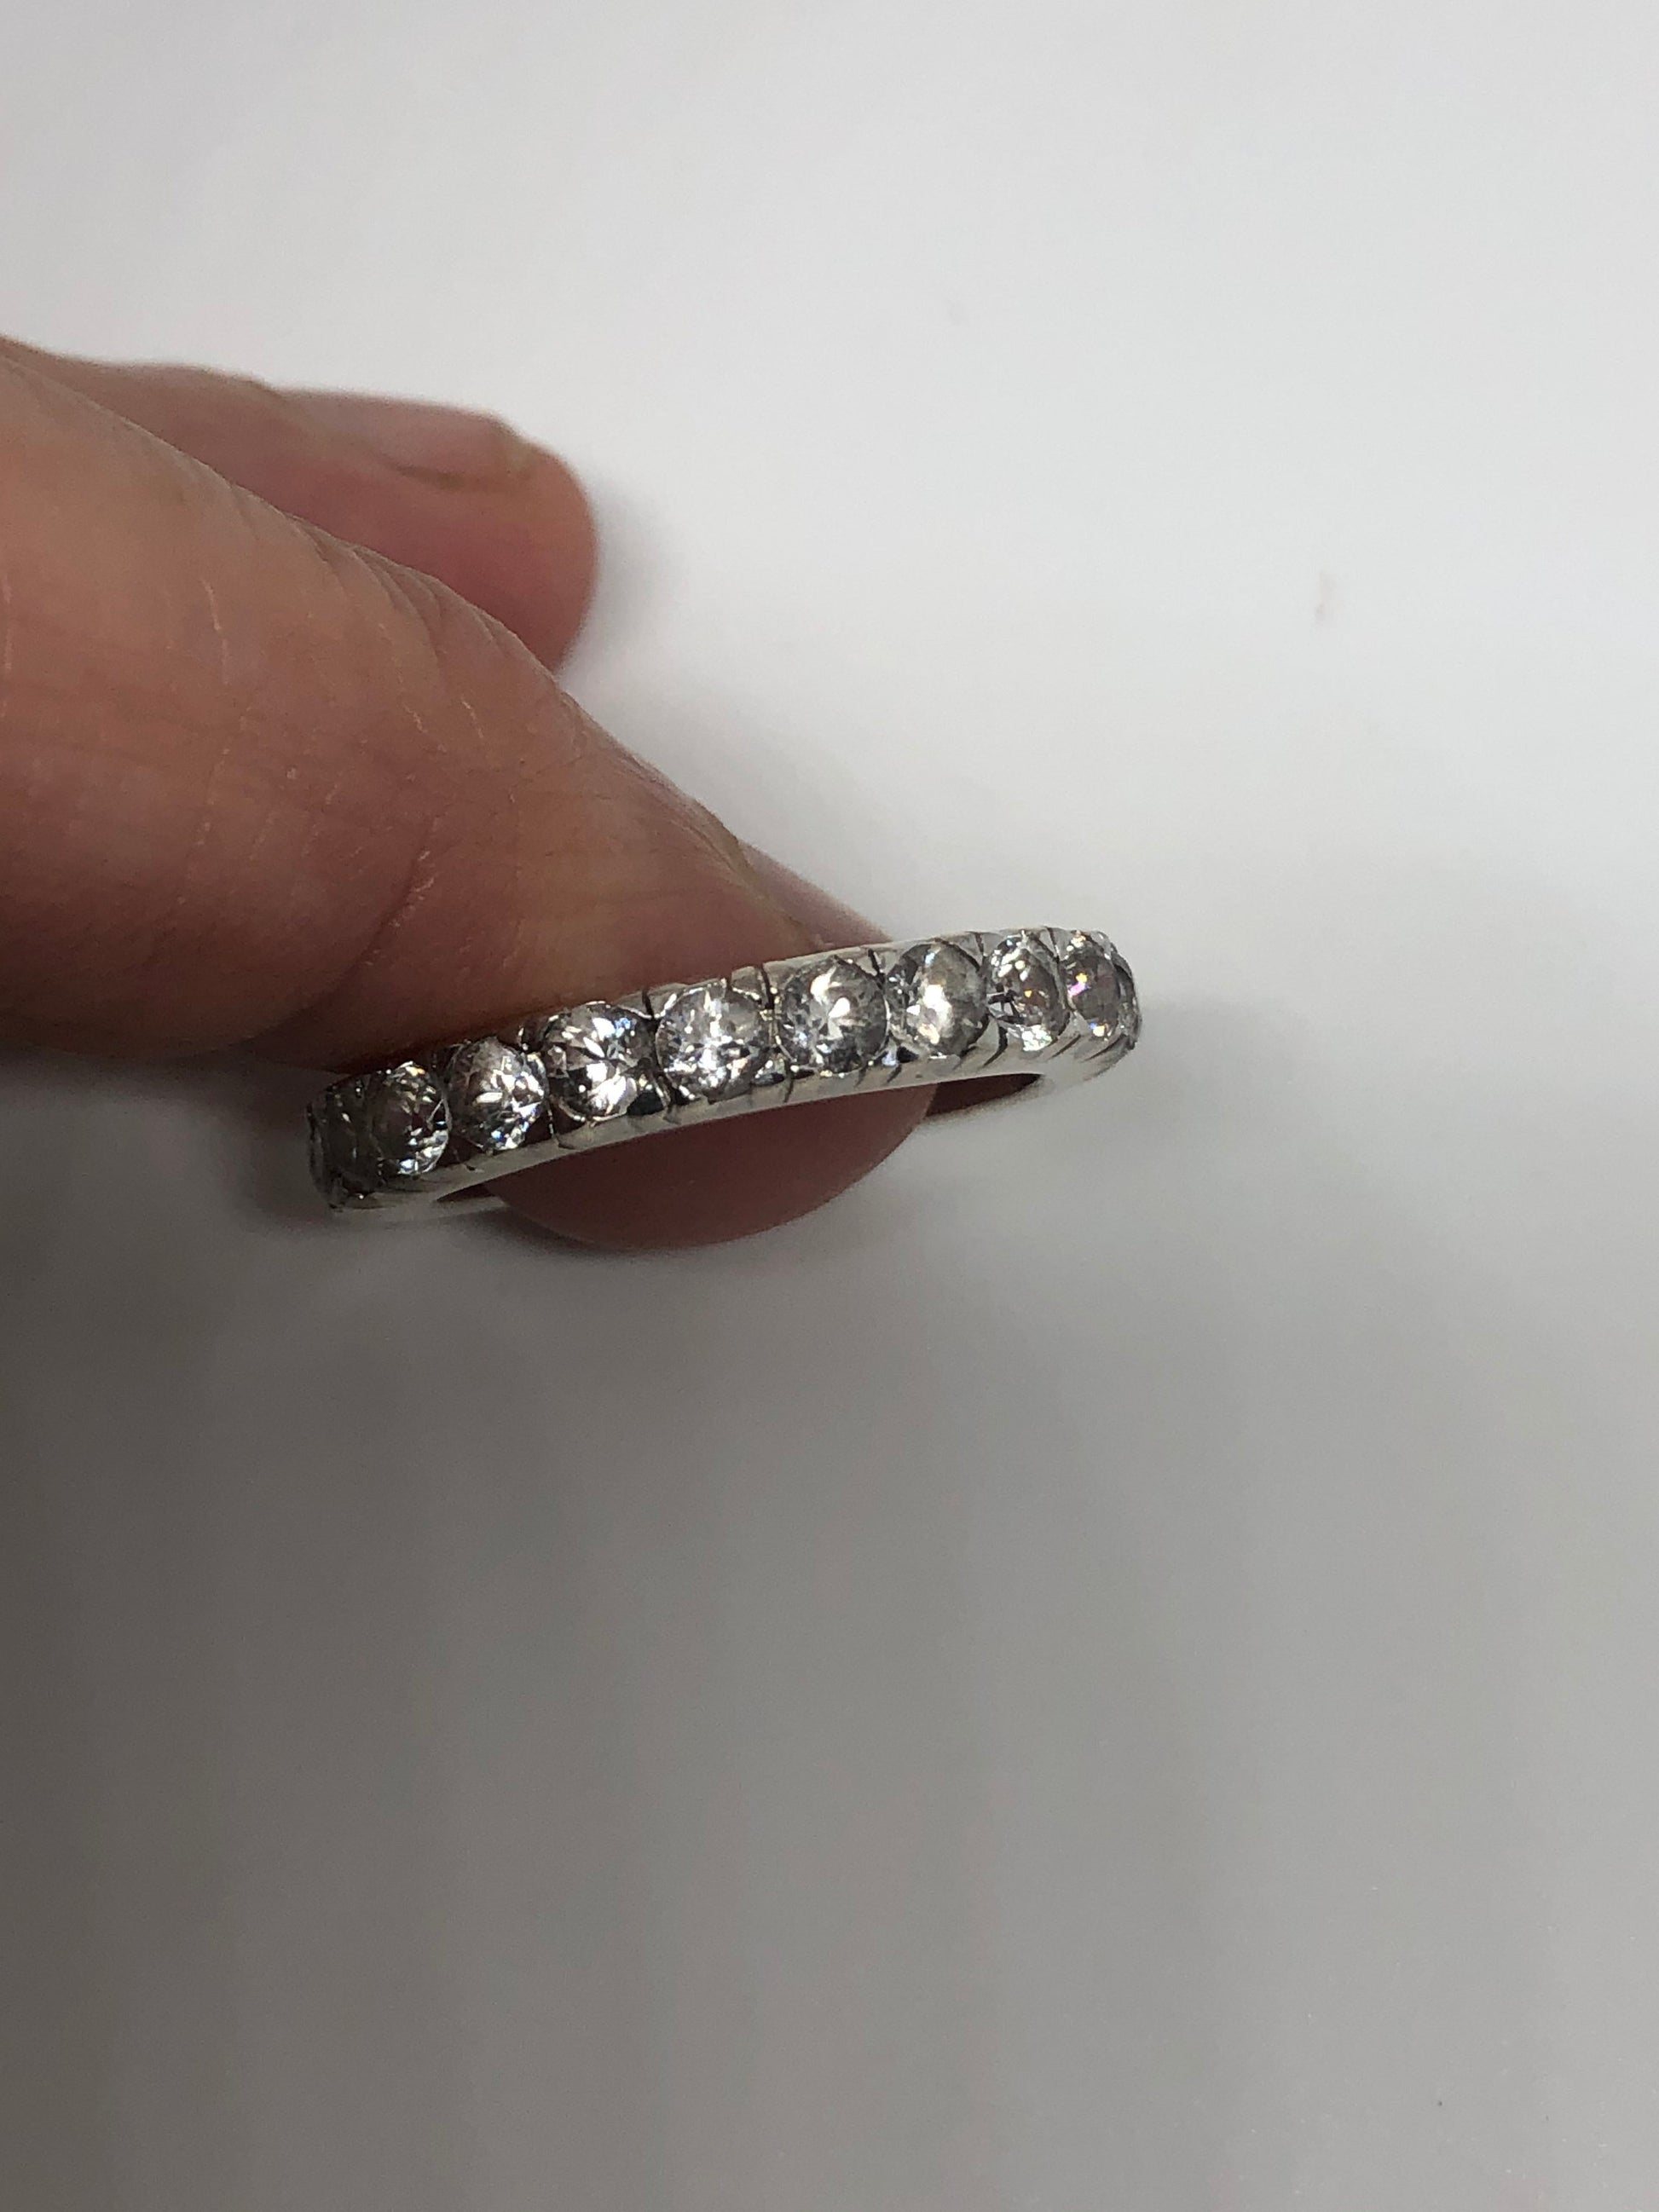 Vintage Clear White Sapphire 925 Sterling Silver Wedding band Ring